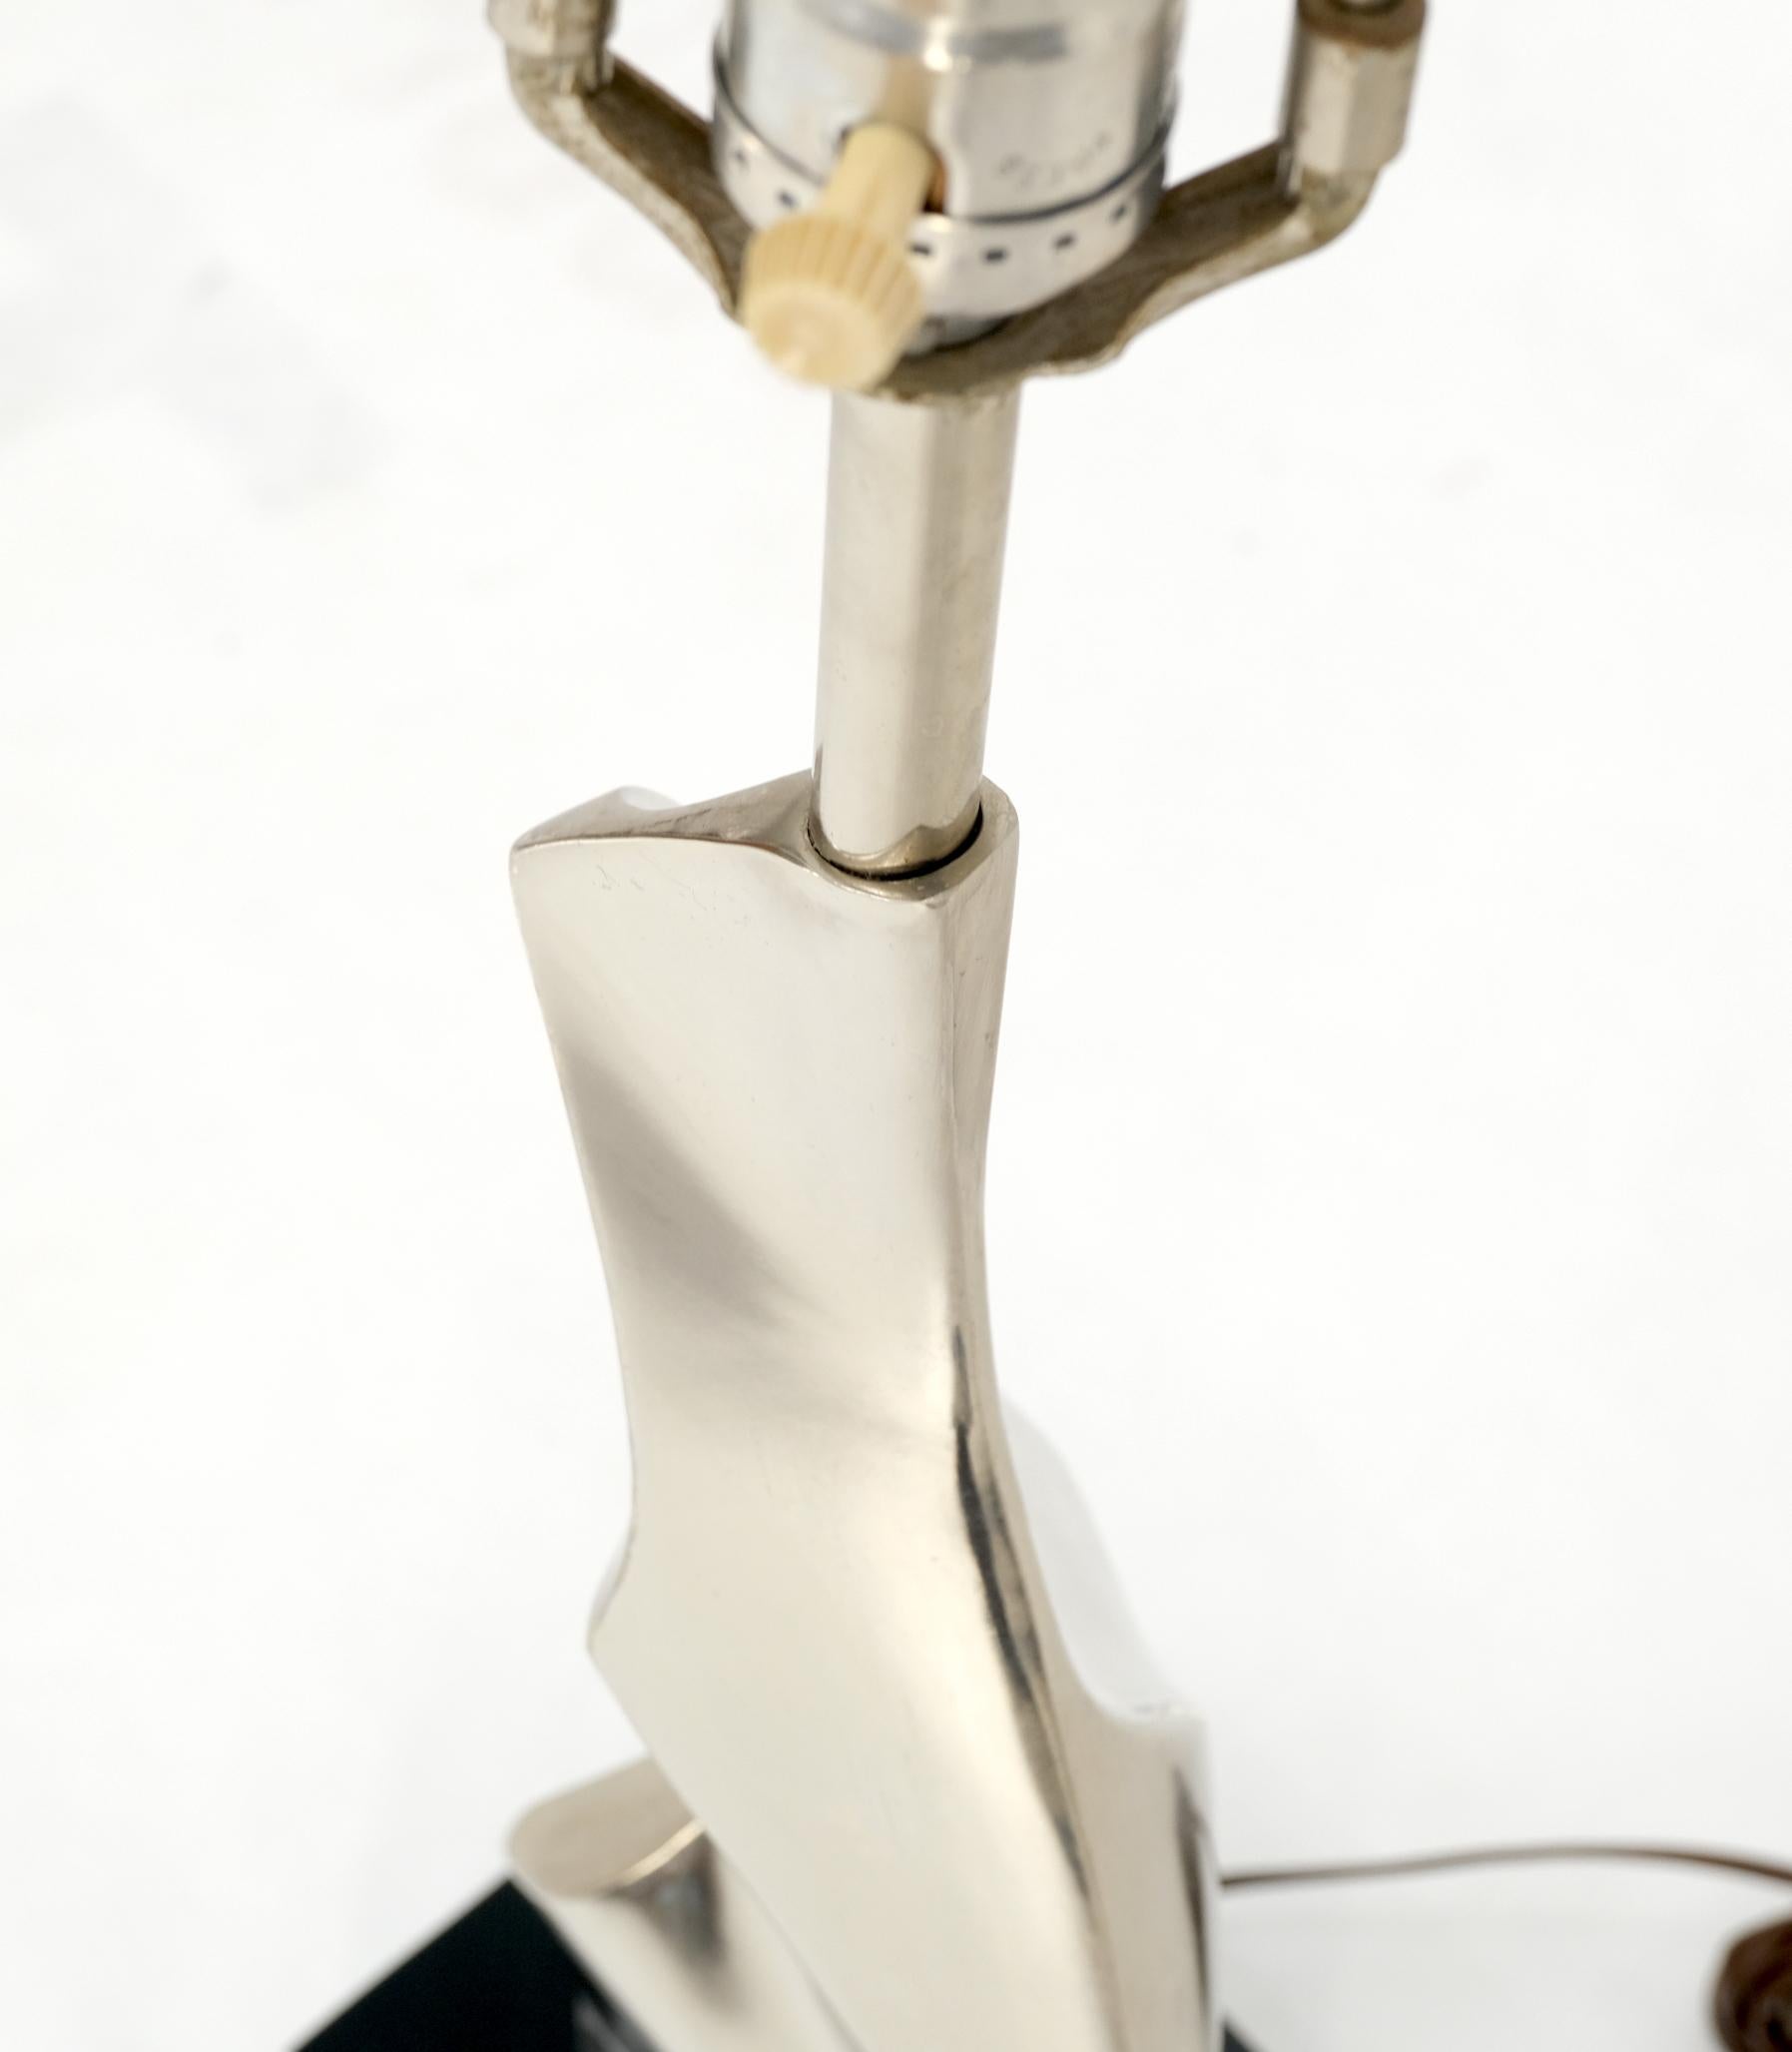 Abstract Polished Metal Chrome Table Lamp in Style of Picasso In Excellent Condition For Sale In Rockaway, NJ